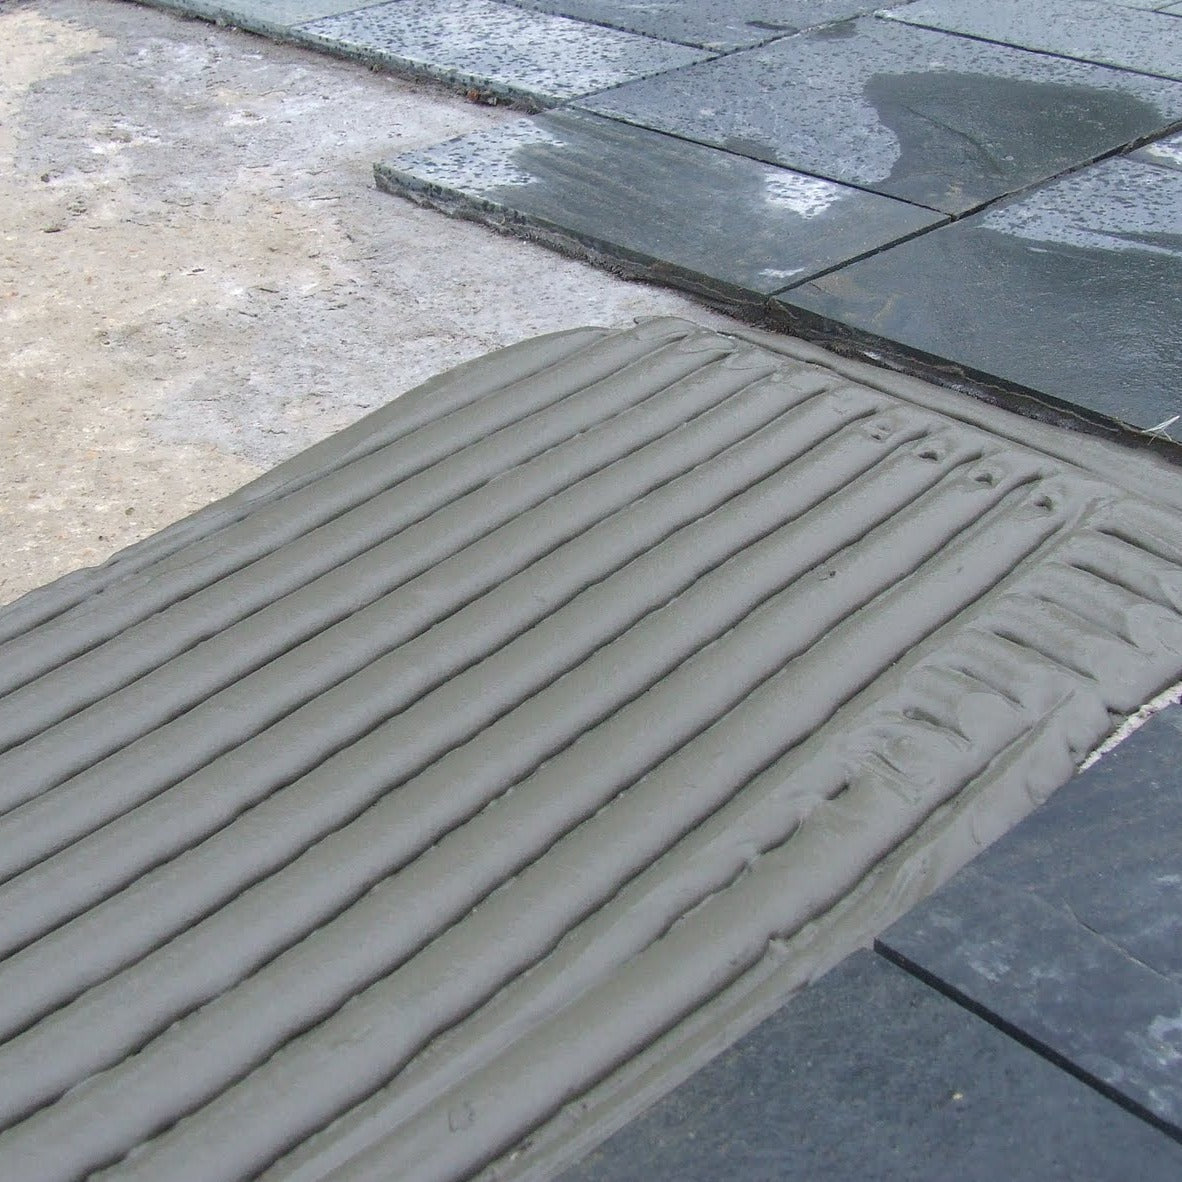 Black Slate Paving Tiles | 800 x 400 x 10 mm| Collection Colchester £18.11/m2